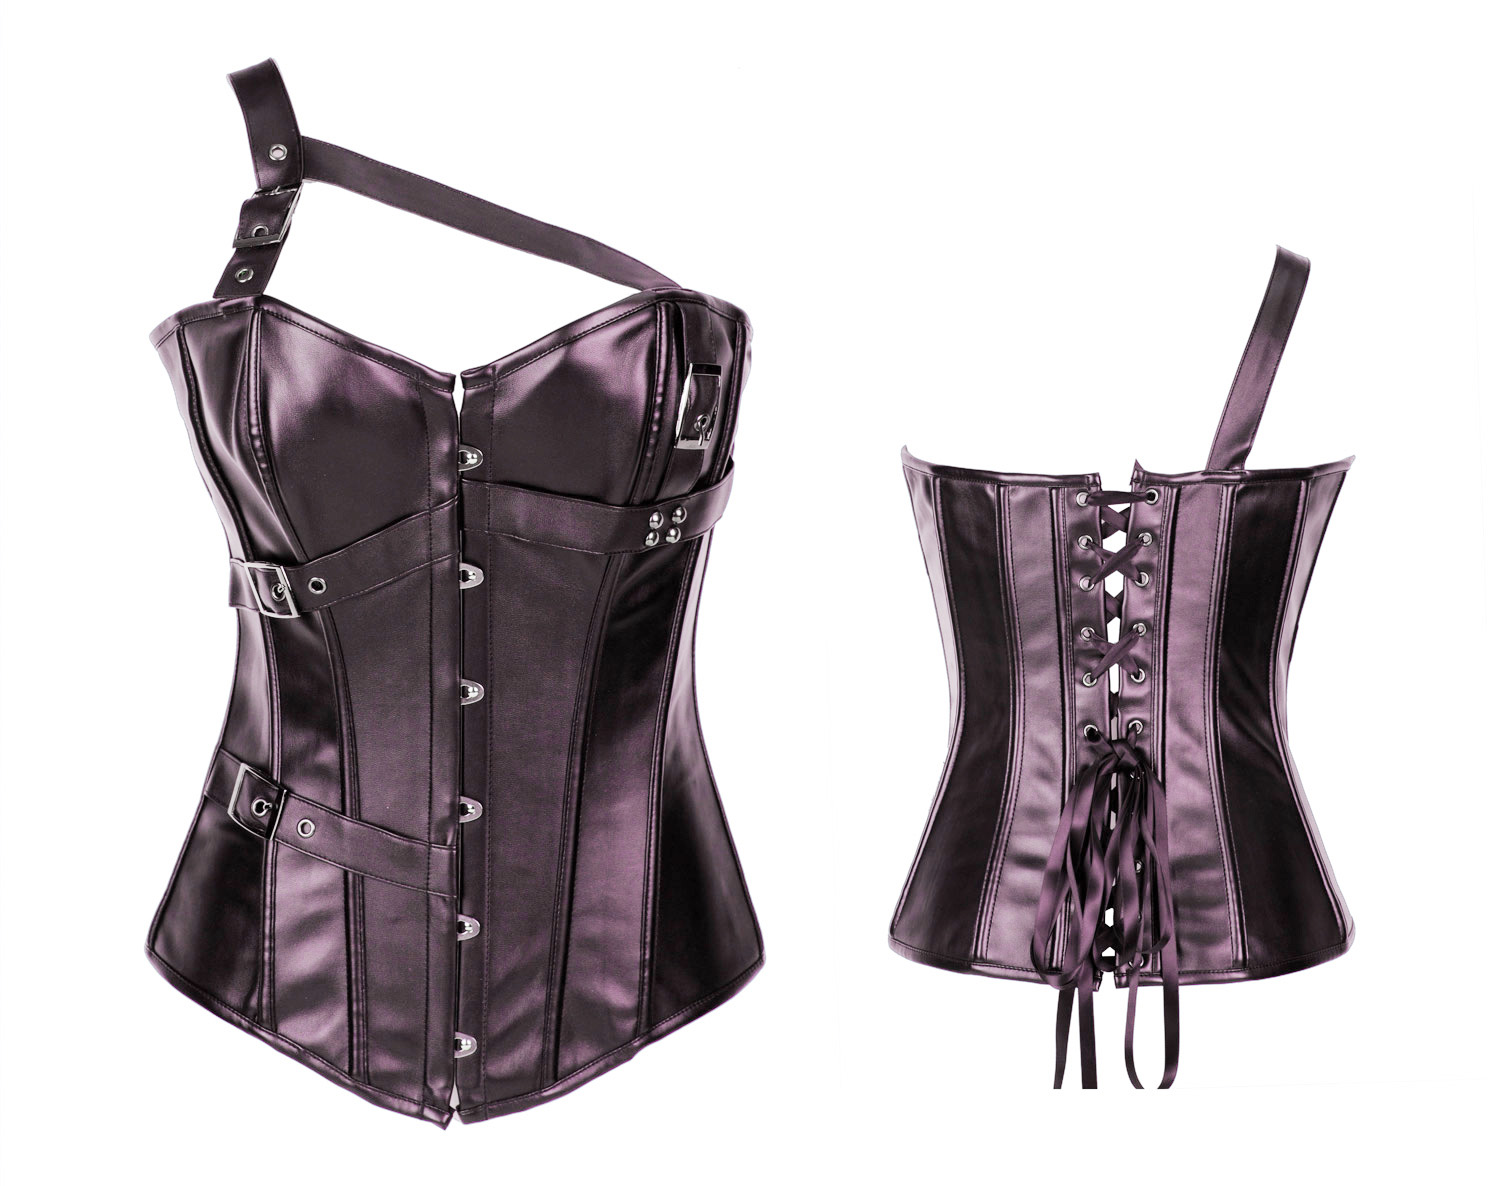 Gothic Influenced Leather Corset